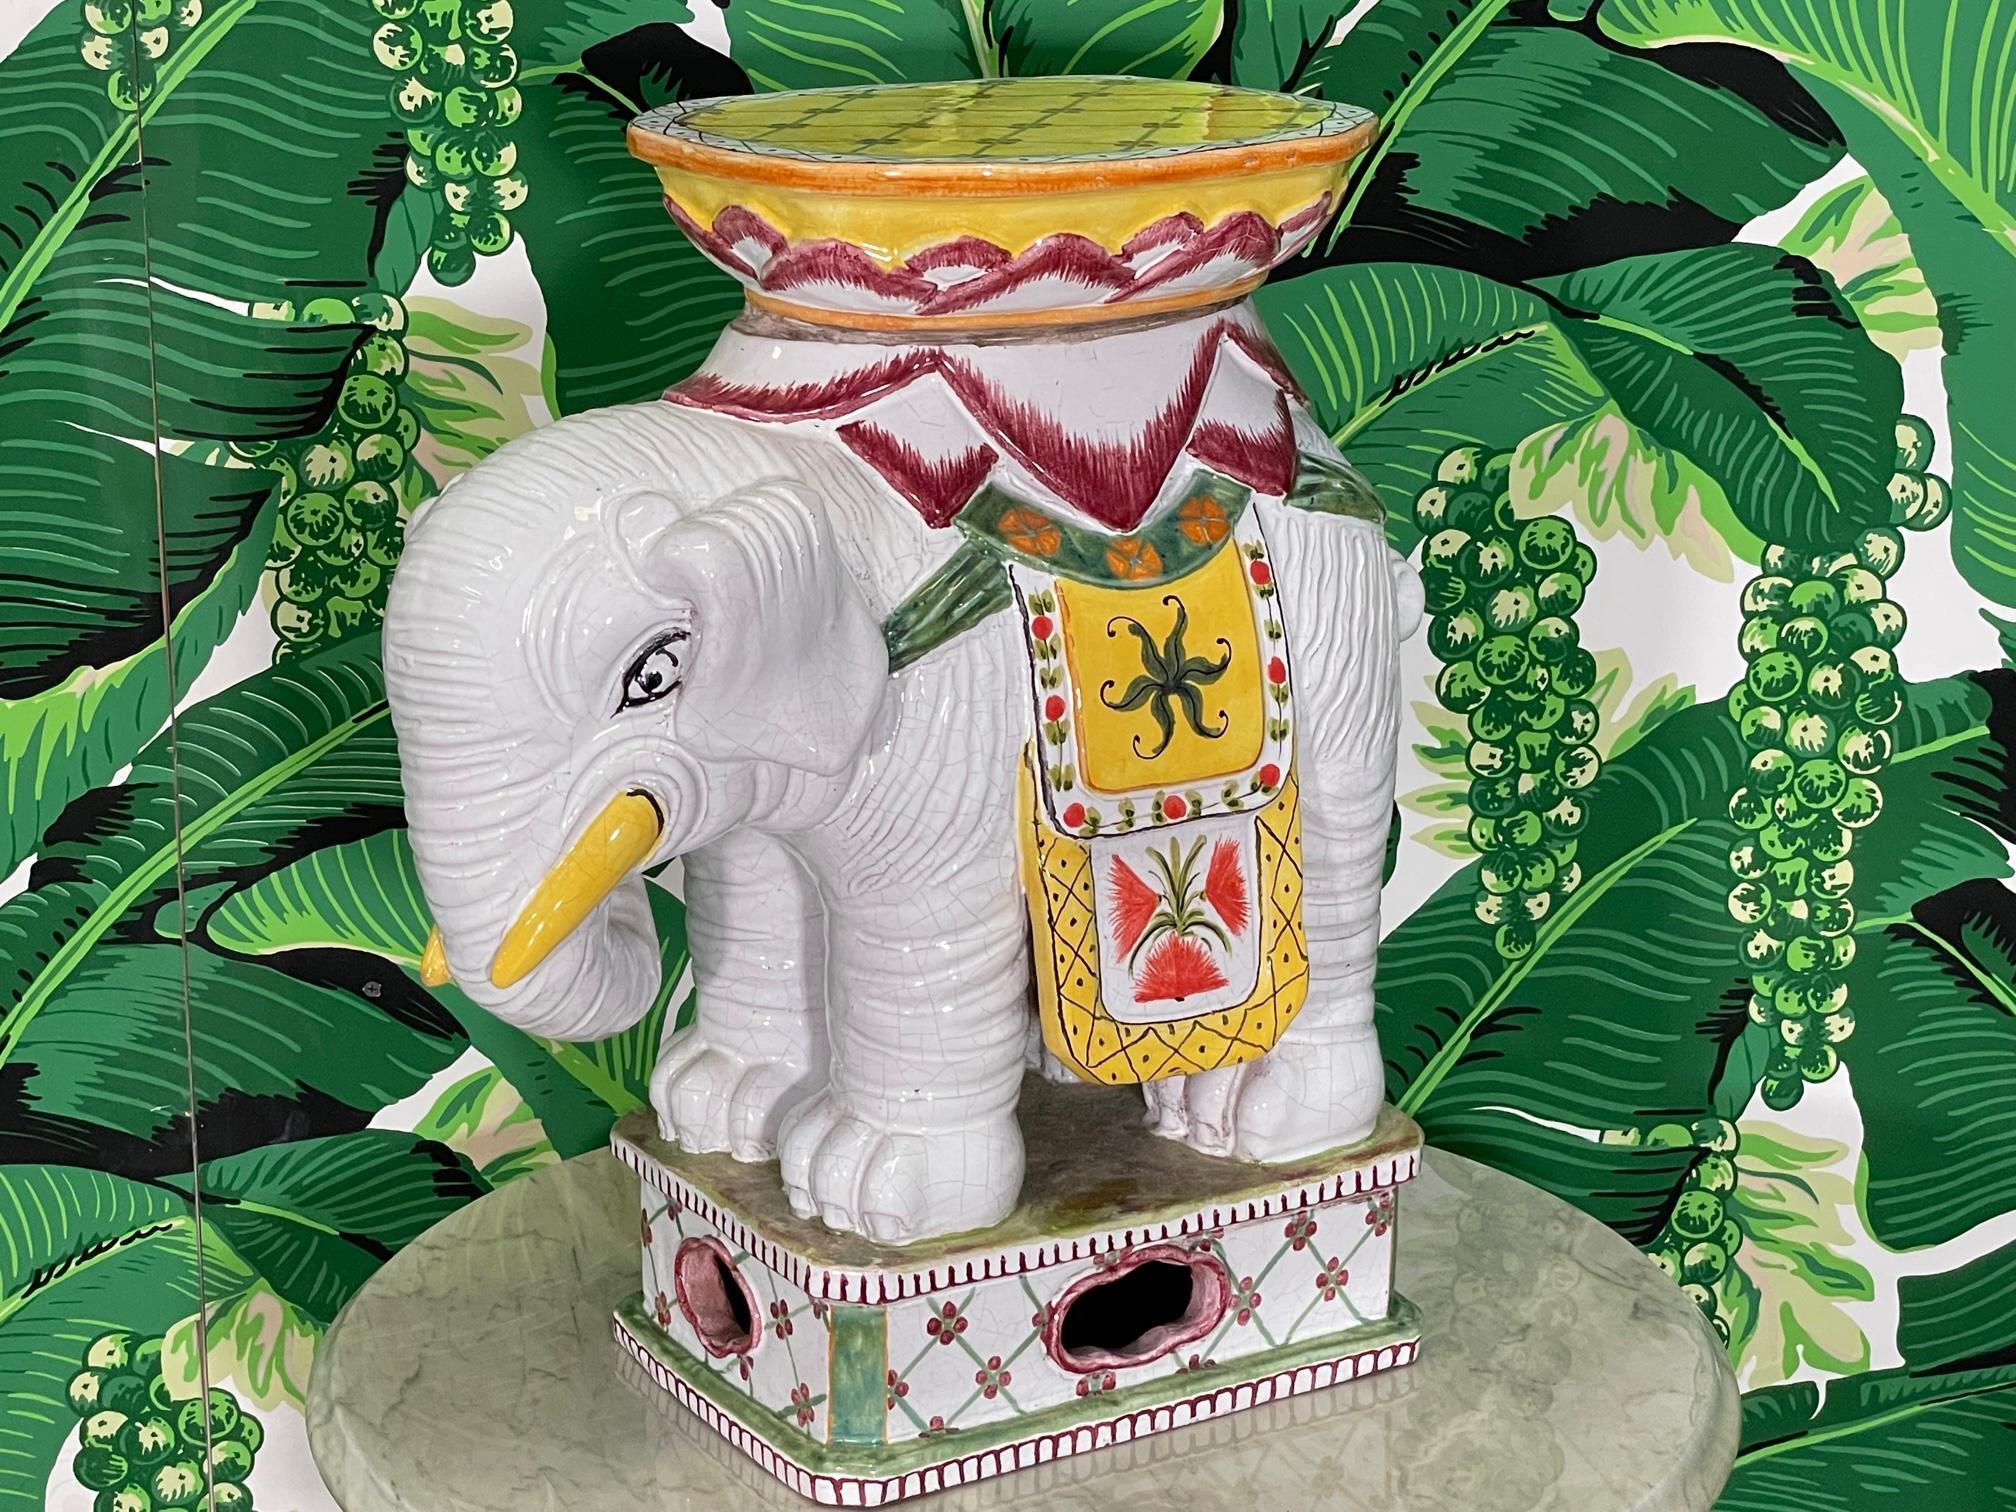 Hand painted ceramic elephant garden seat, could be used as an end table or footstool, finished in glossy white with vibrant accent colors. Good condition with minor imperfections consistent with age, see photos for condition details. 
For a